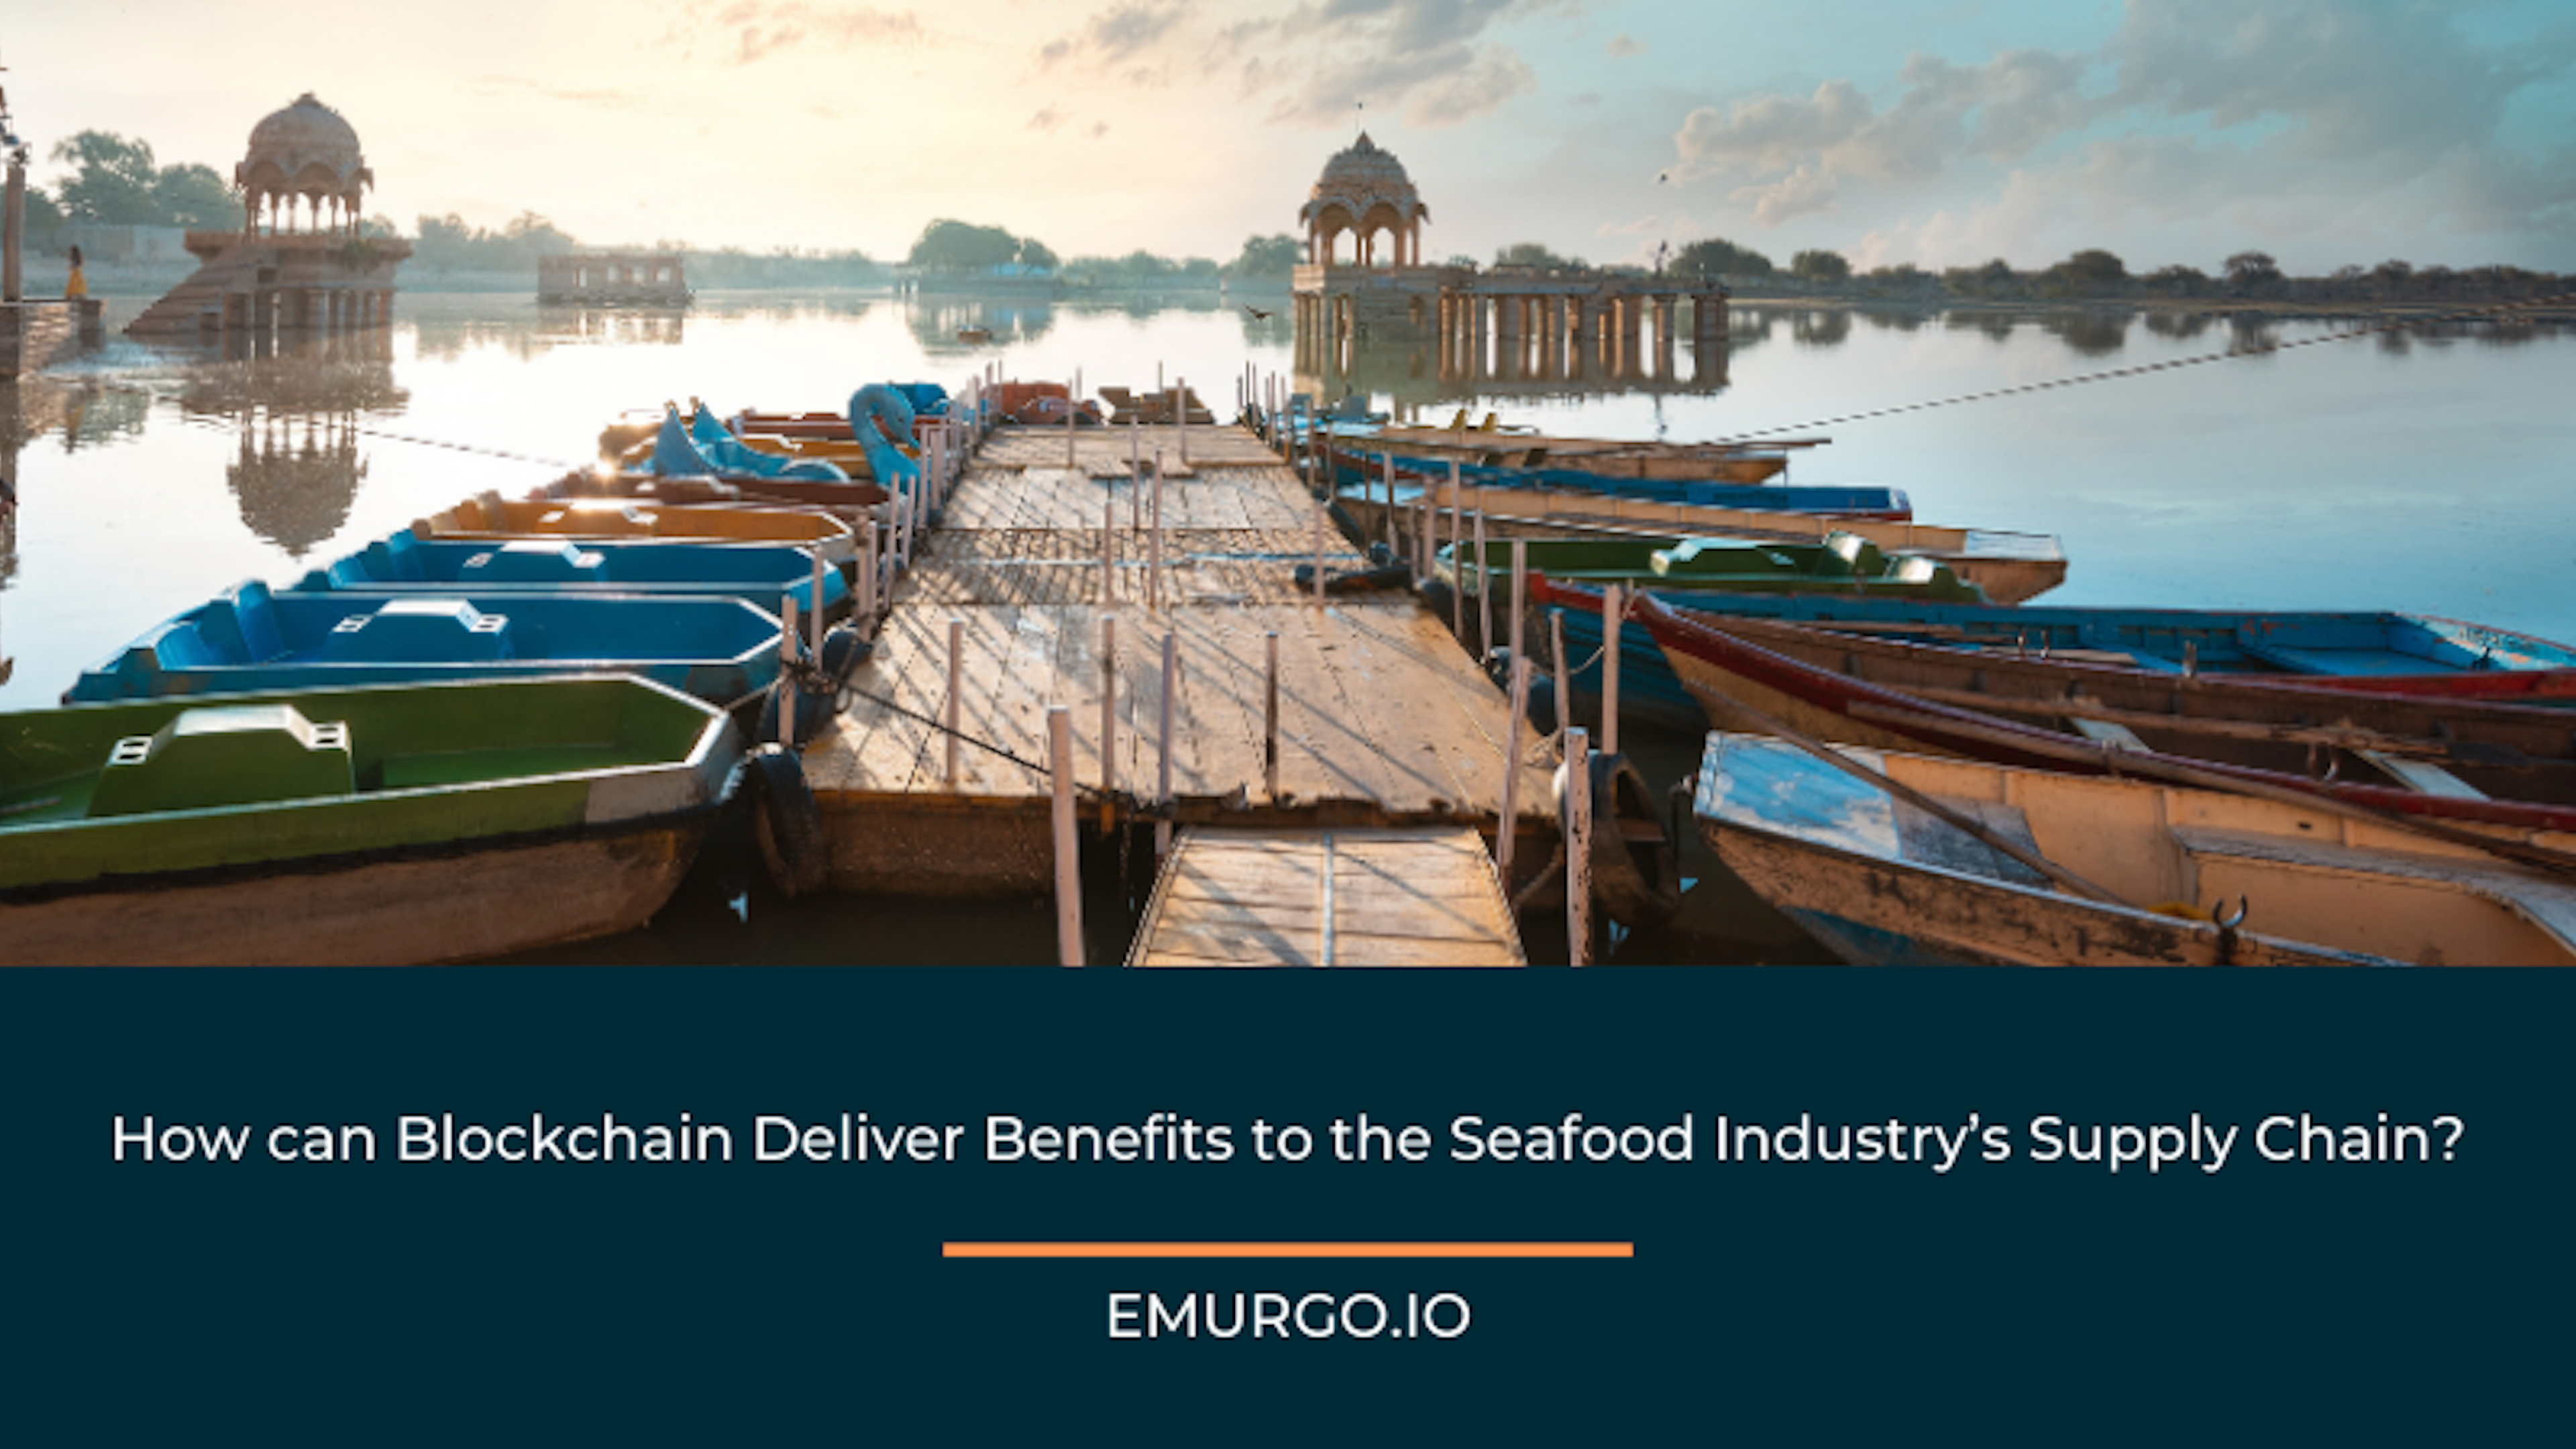 How can Blockchain Deliver Benefits to the Seafood Industry’s Supply Chain?